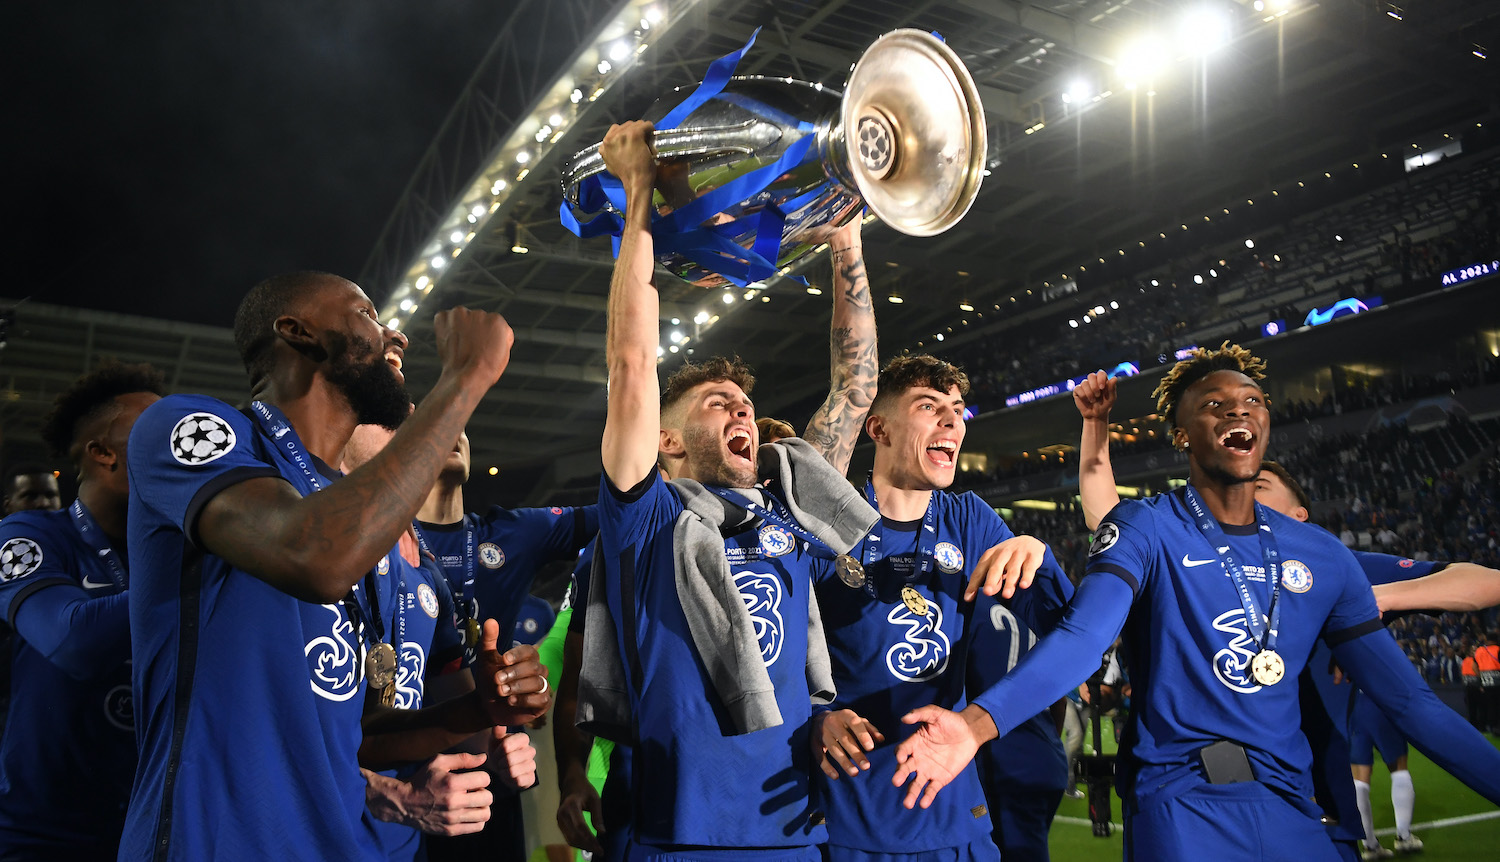 PORTO, PORTUGAL - MAY 29: Christian Pulisic of Chelsea celebrates with the Champions League Trophy alongside teammates Antonio Ruediger, Kai Havertz and Tammy Abraham following their team's victory during the UEFA Champions League Final between Manchester City and Chelsea FC at Estadio do Dragao on May 29, 2021 in Porto, Portugal. (Photo by David Ramos/Getty Images)